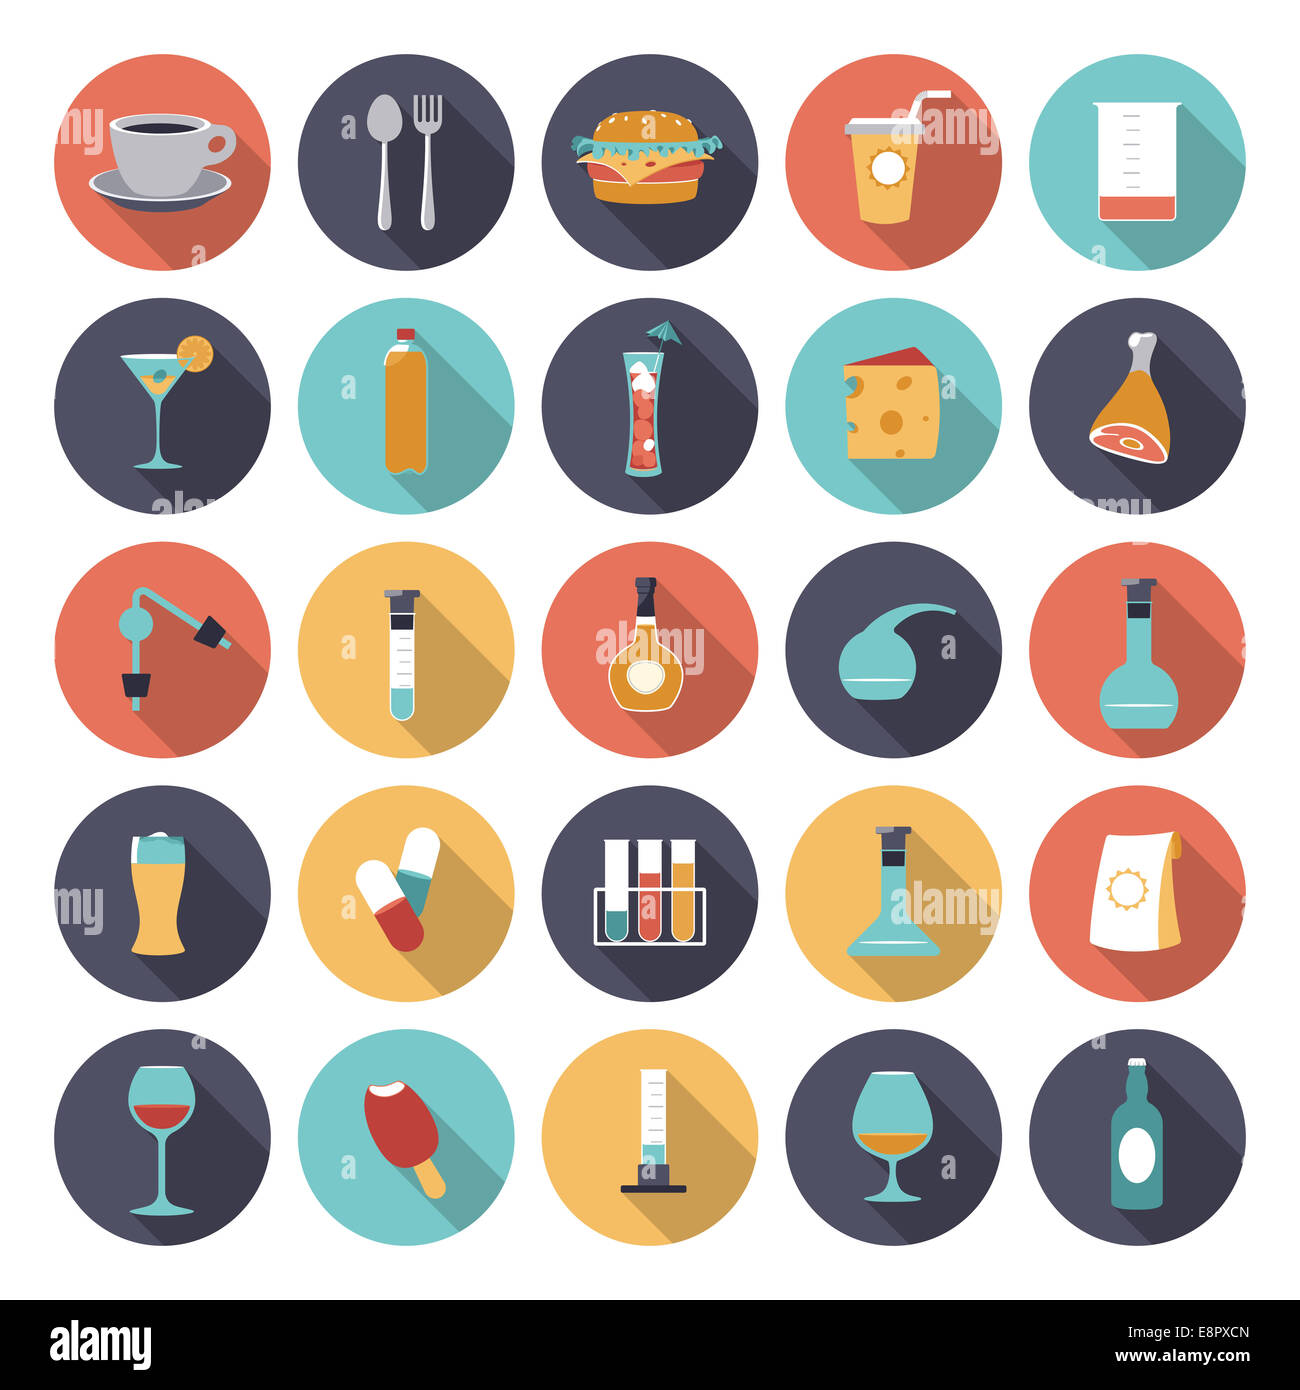 Flat design icons for food and drinks industry. Stock Photo